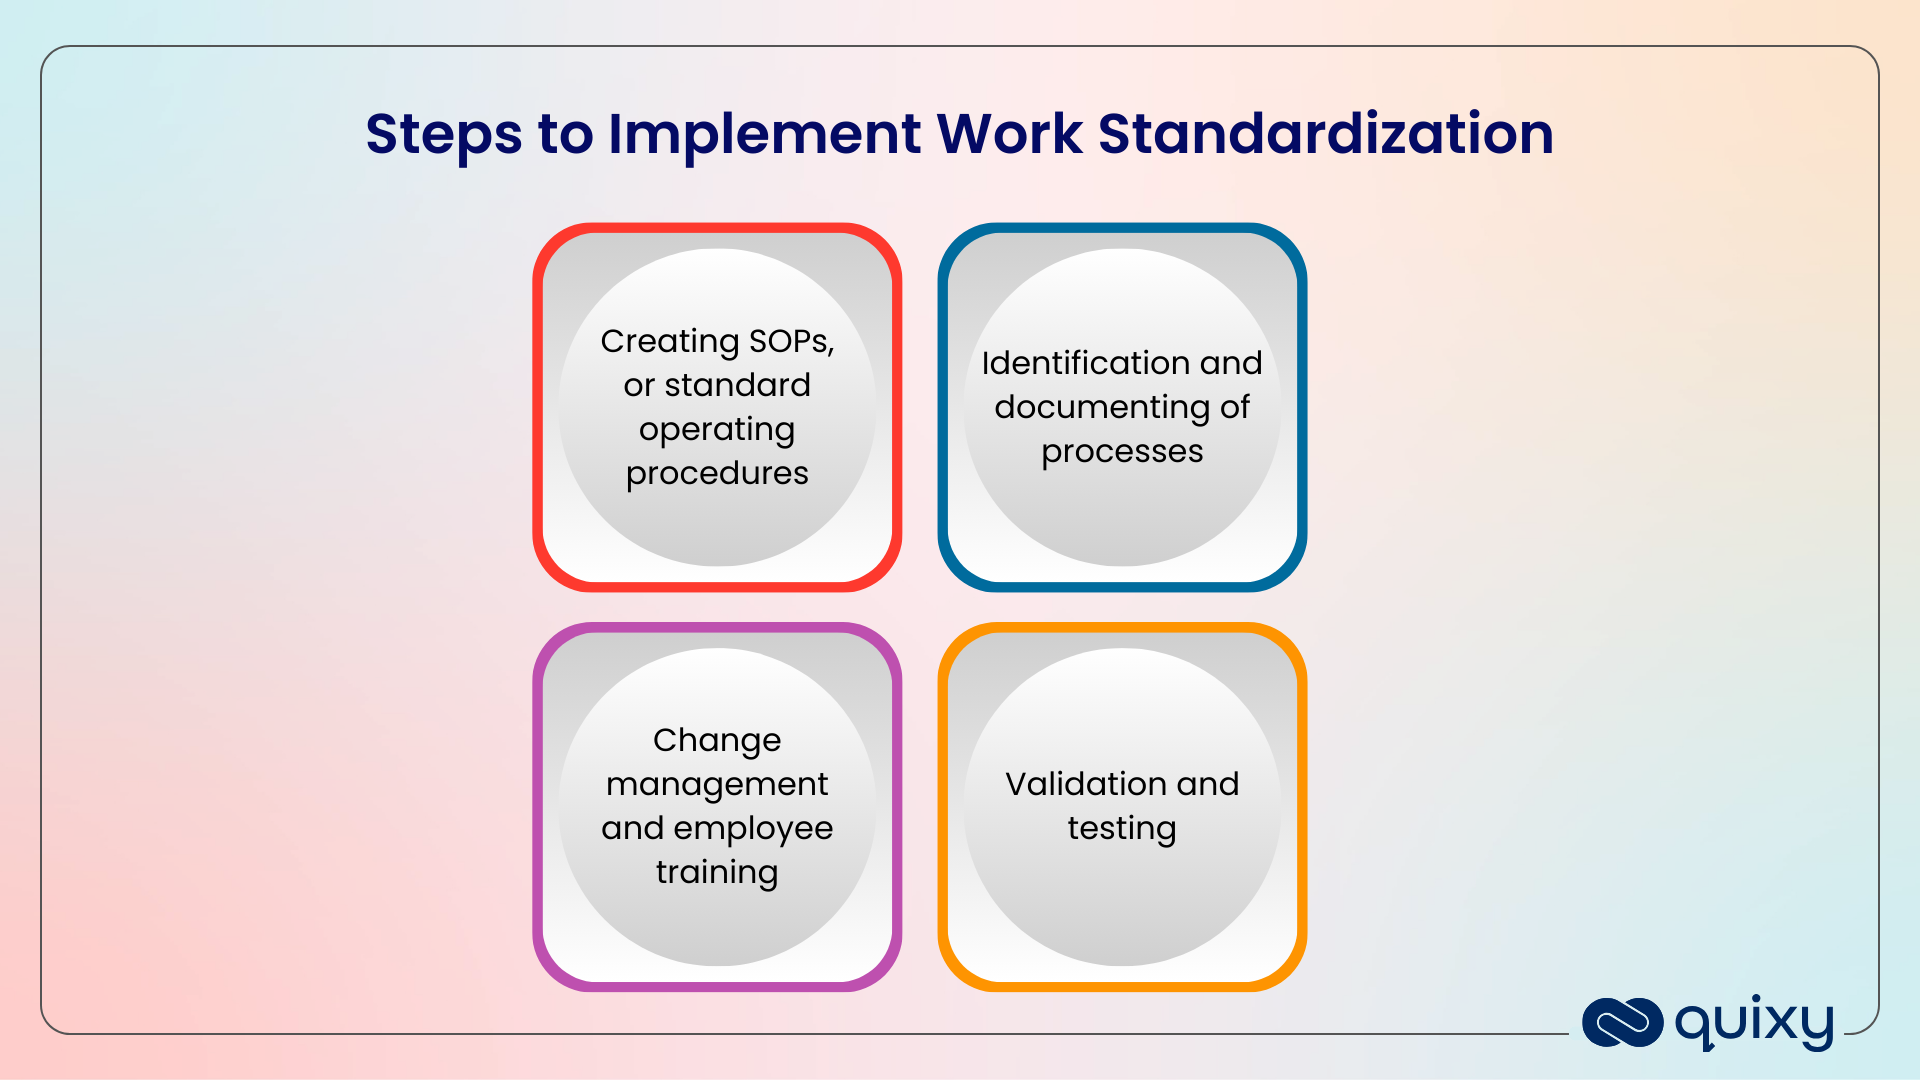 Steps to Implement process Standardization